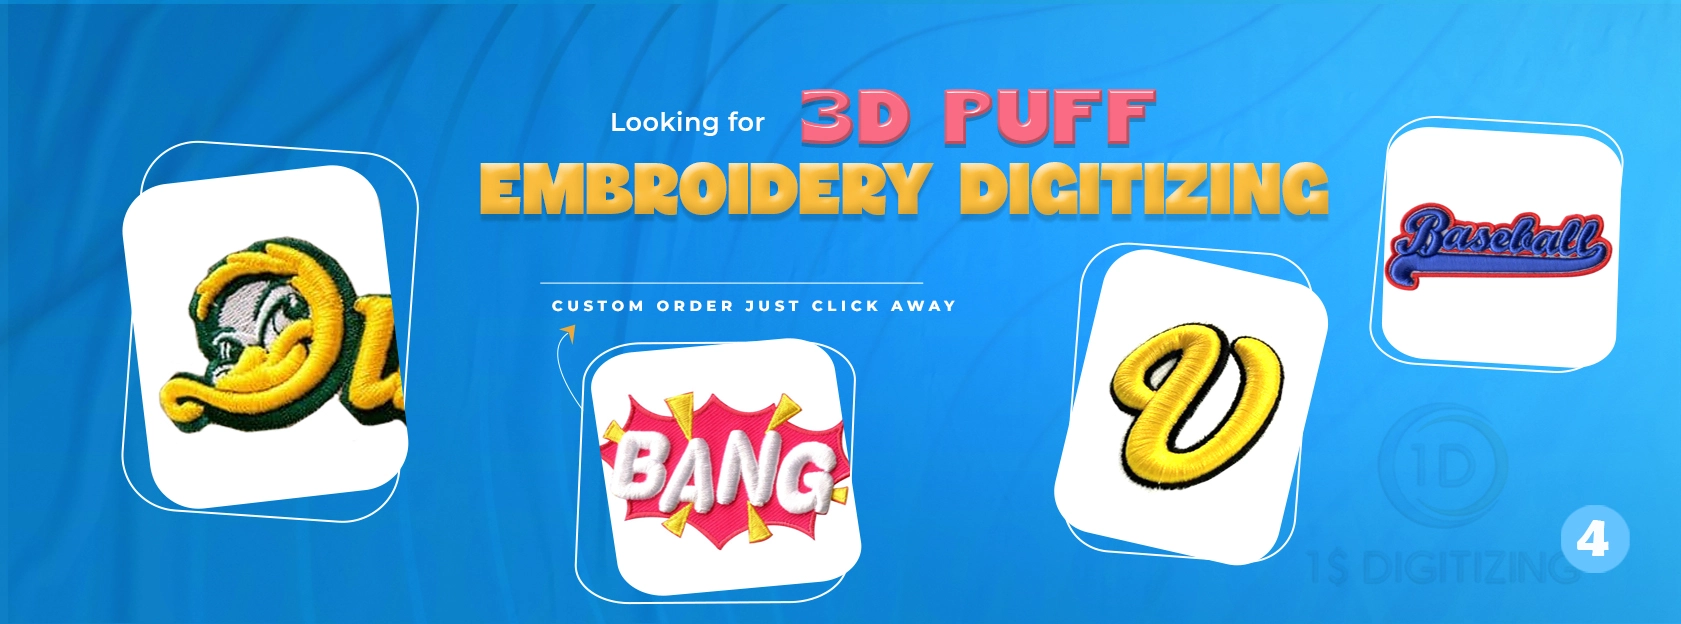 3D puff embroidery digitizing 